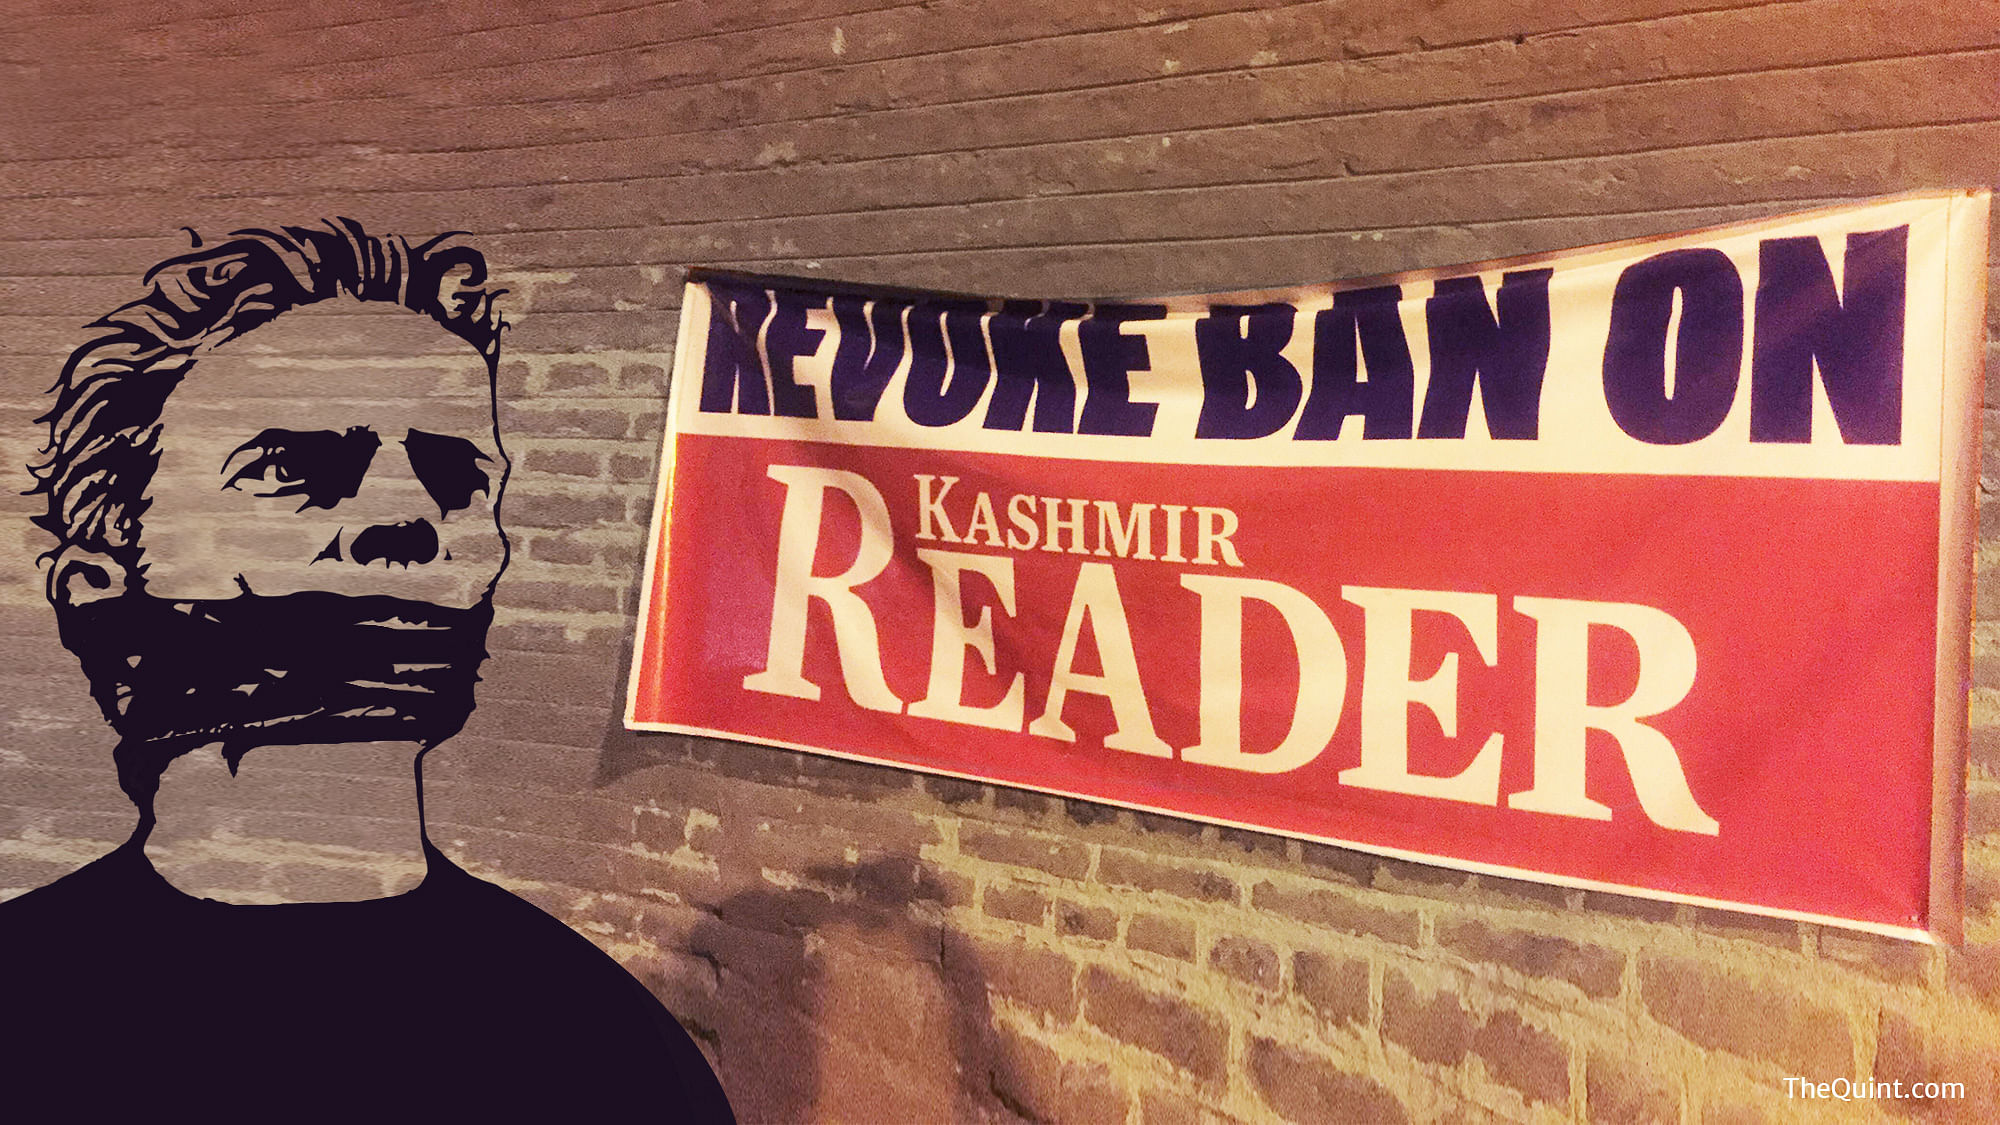 Mehbooba Mufti’s government has banned Kashmir Reader on the pretext of “publishing content that can incite acts of violence” and “disturb public tranquility”. (Photo: <b>The Quint</b>)